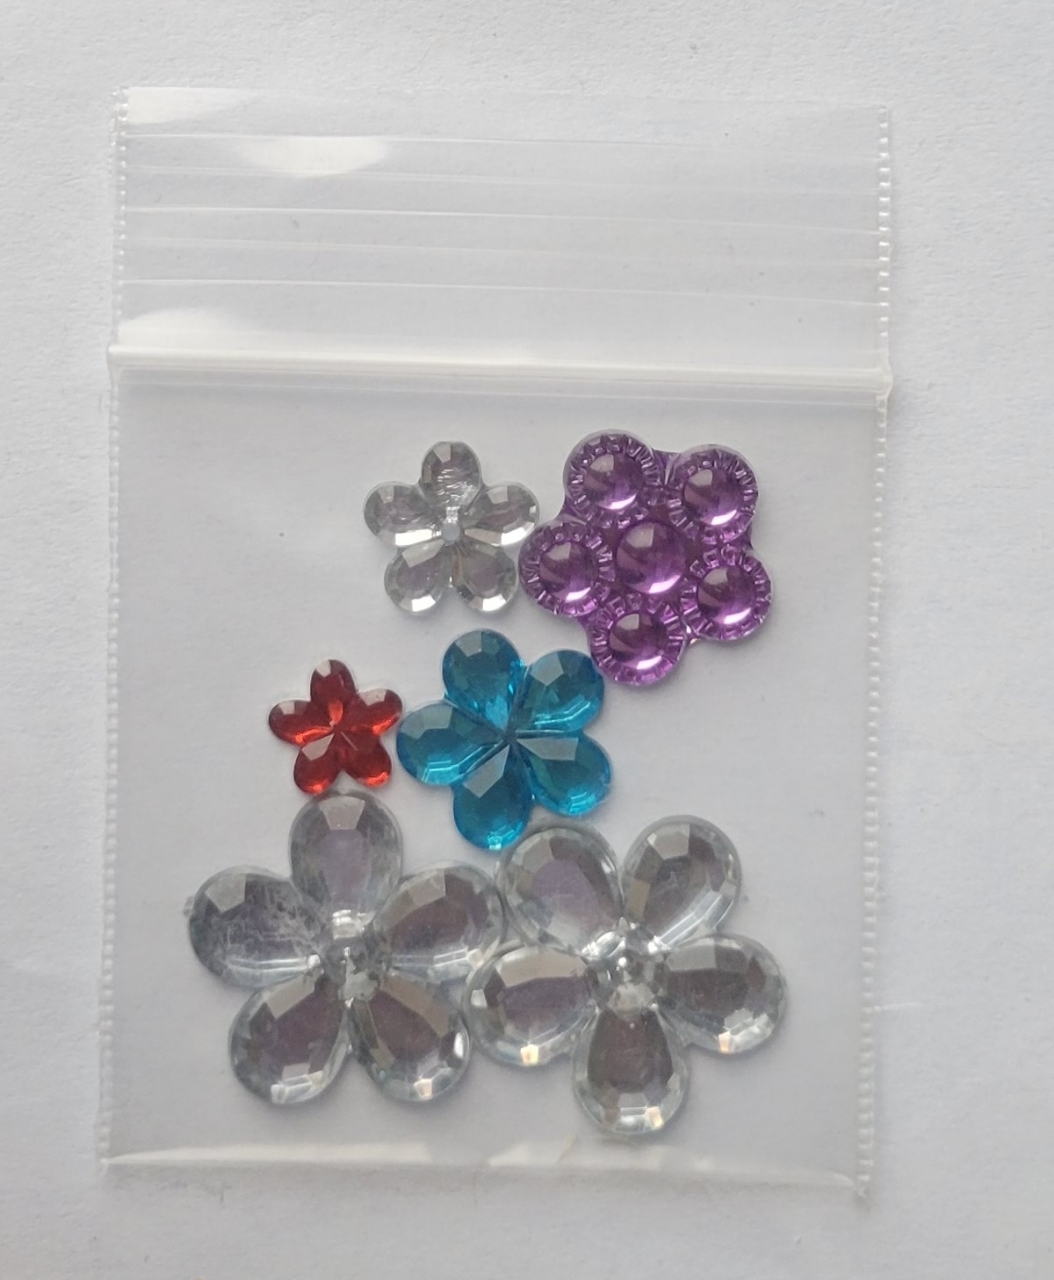 Picture of Flower Gem Set with 2 Jumbo Flowers - Assorted colors and sizes - (6 pc.) (FG-2Jumbo)